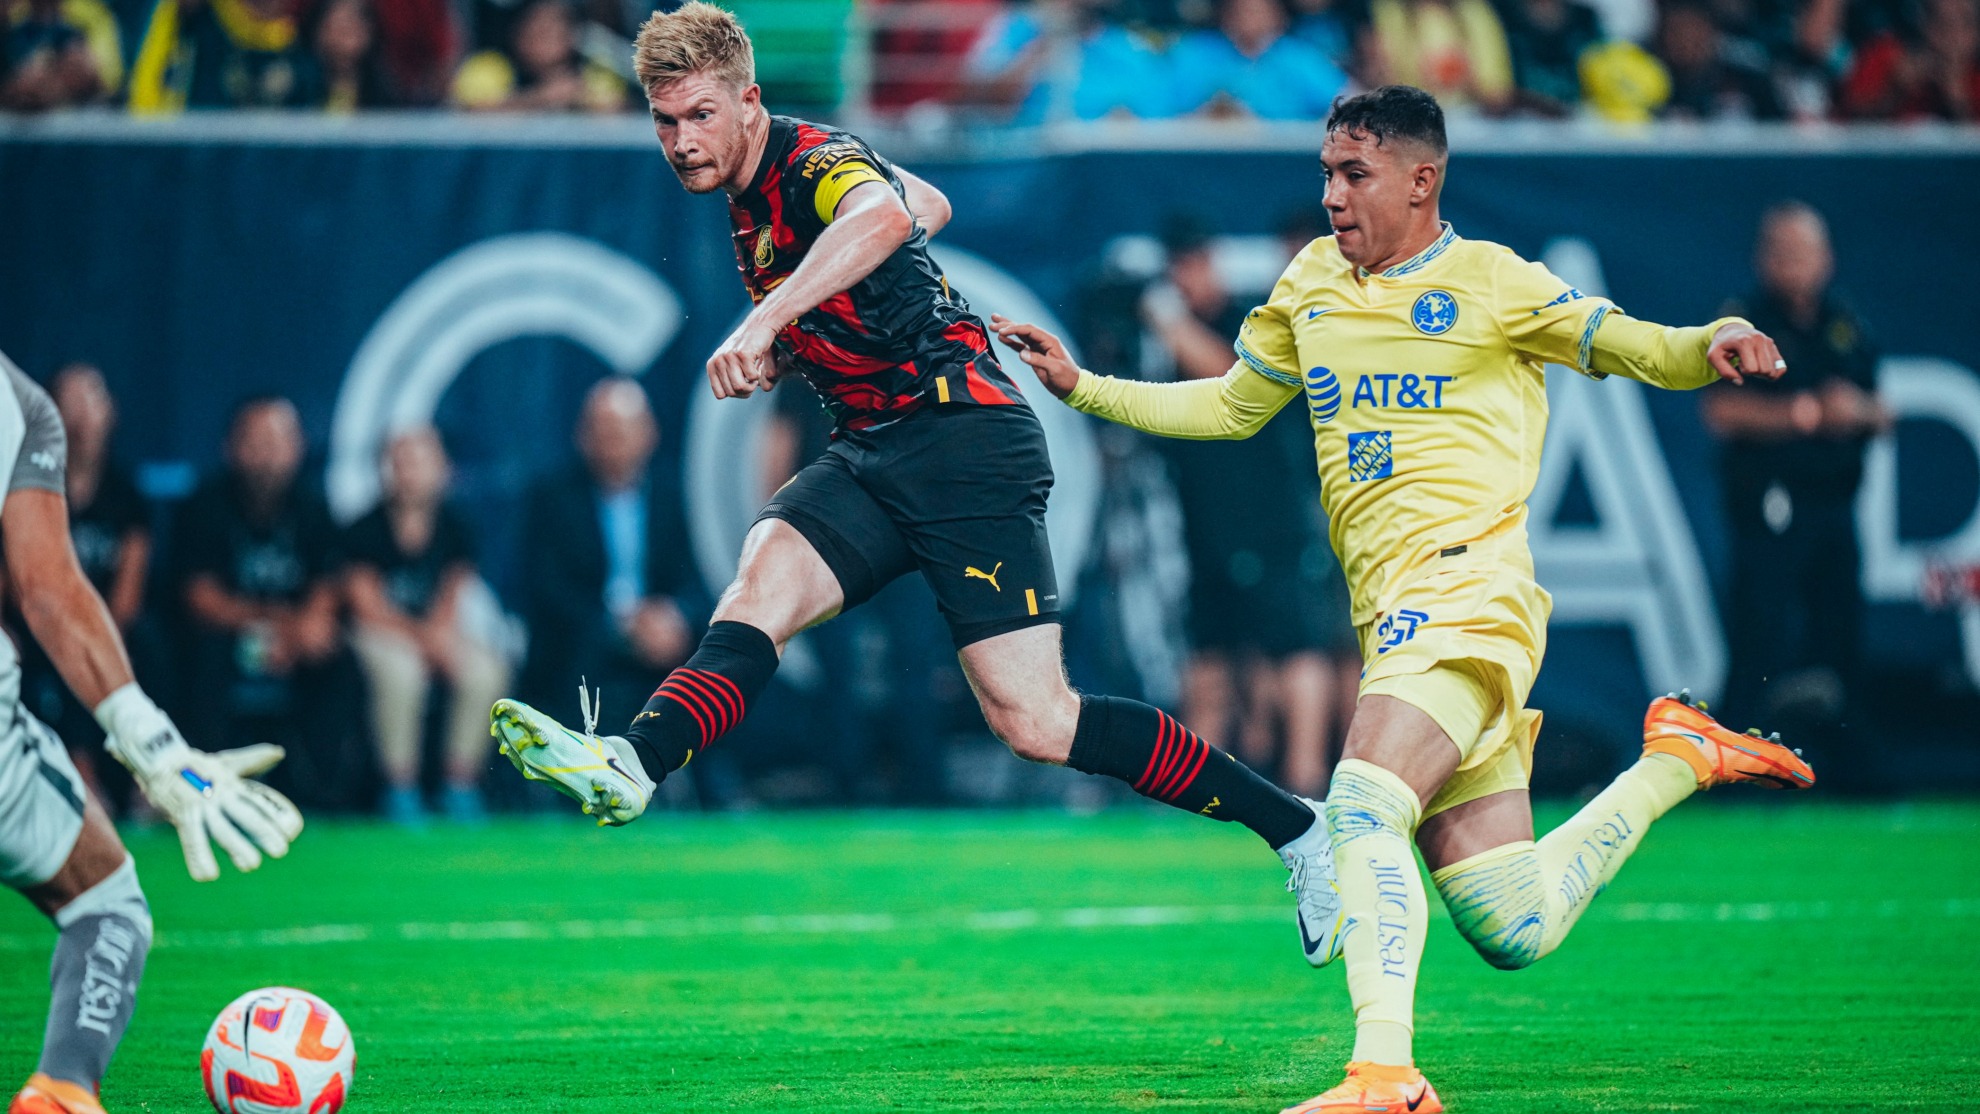 Kevin De Bruyne leads the way for Manchester City's win in Houston against Club América